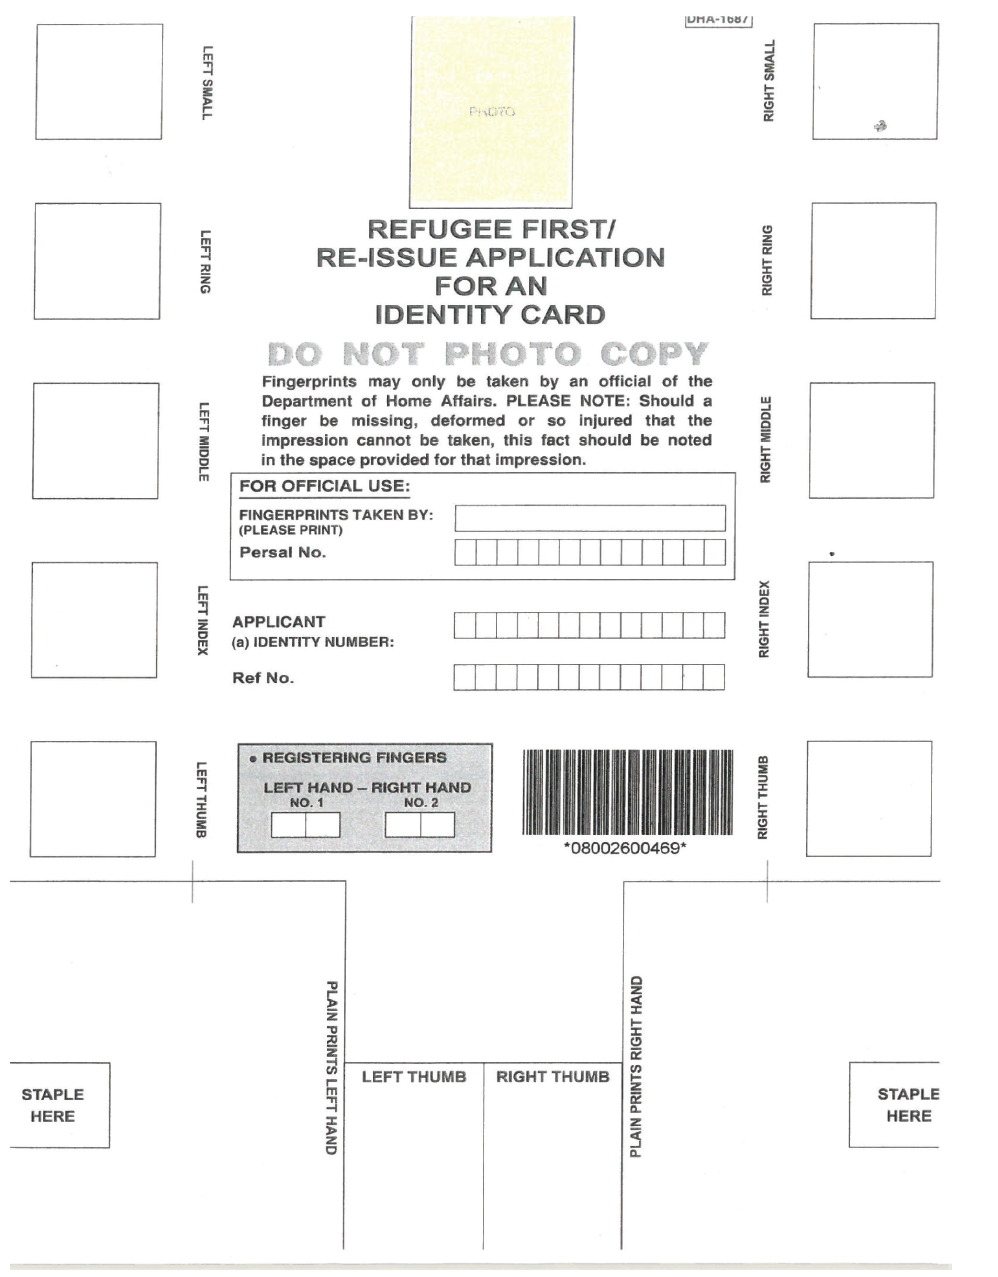 Form 11 Application for Refugee Identity Document DHA 1687 2